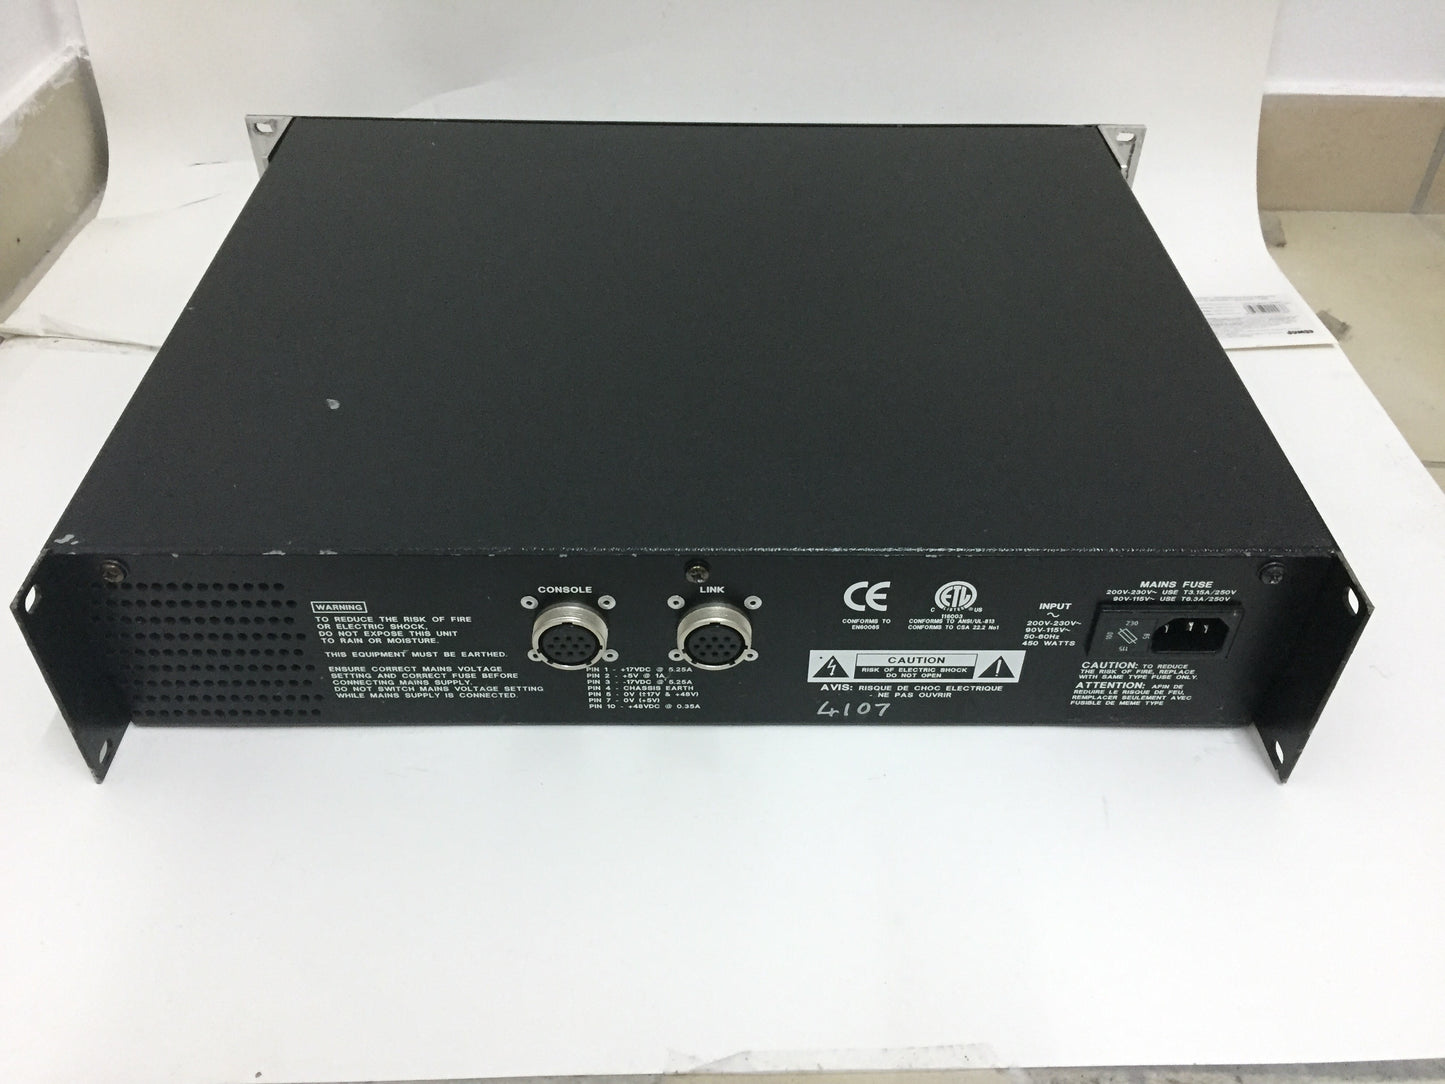 Soundcraft CPS-275 CPS275 Console Power Supply